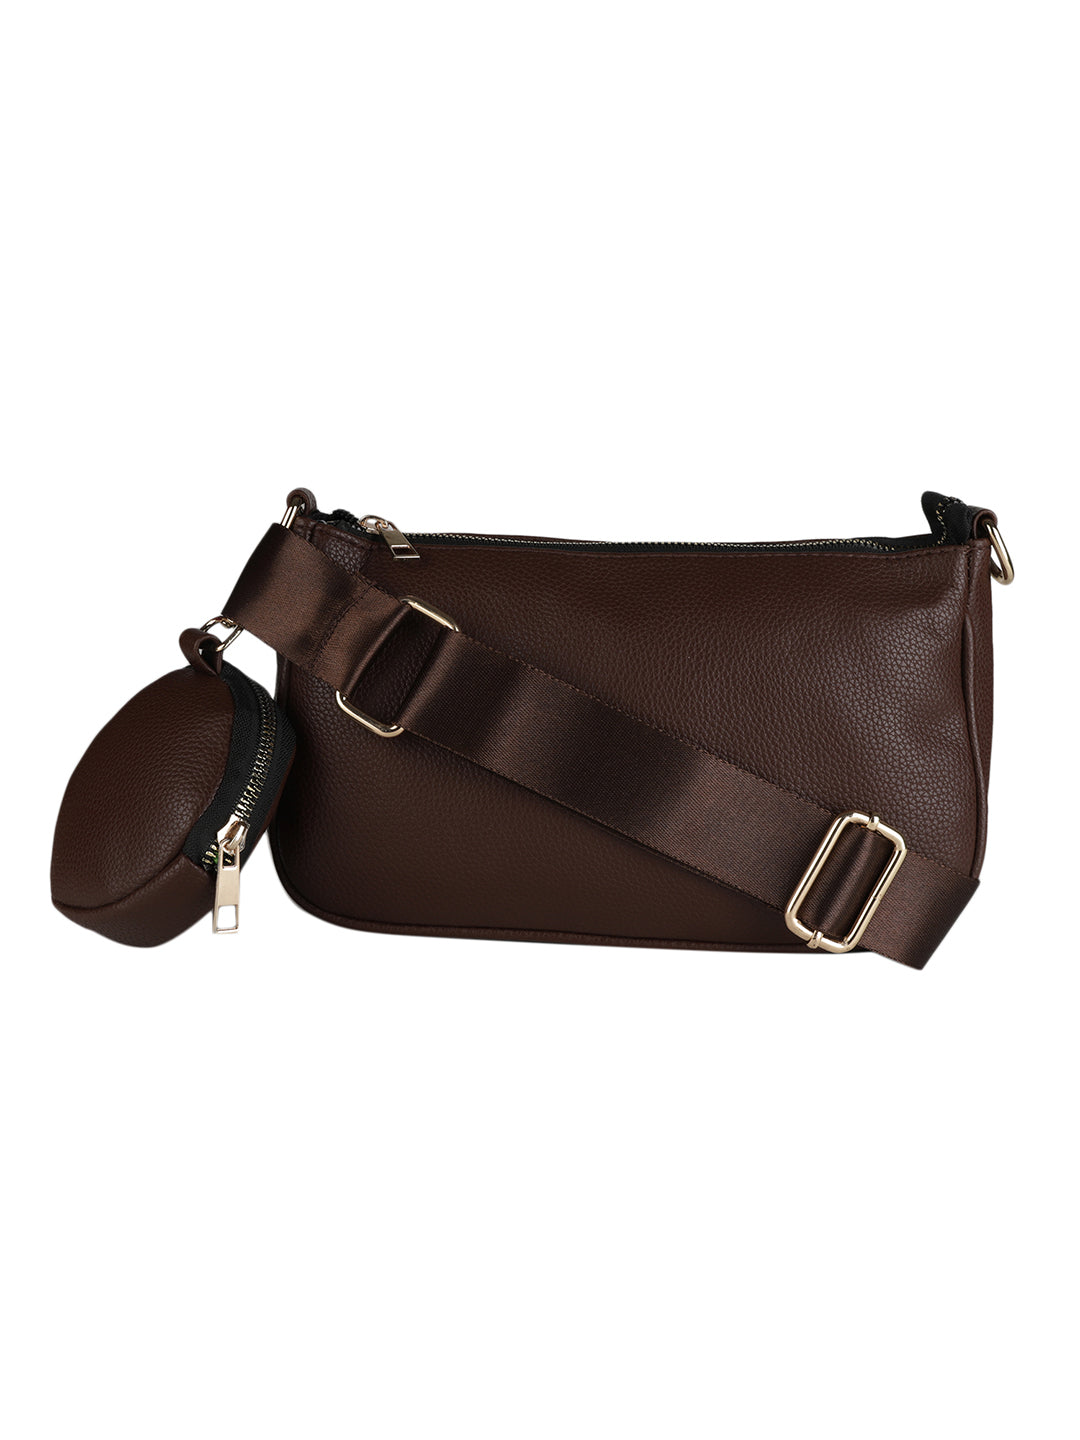 MINI WESST Brown Casual Solid Sling Bag with Round Pouch(MWHB157BR)